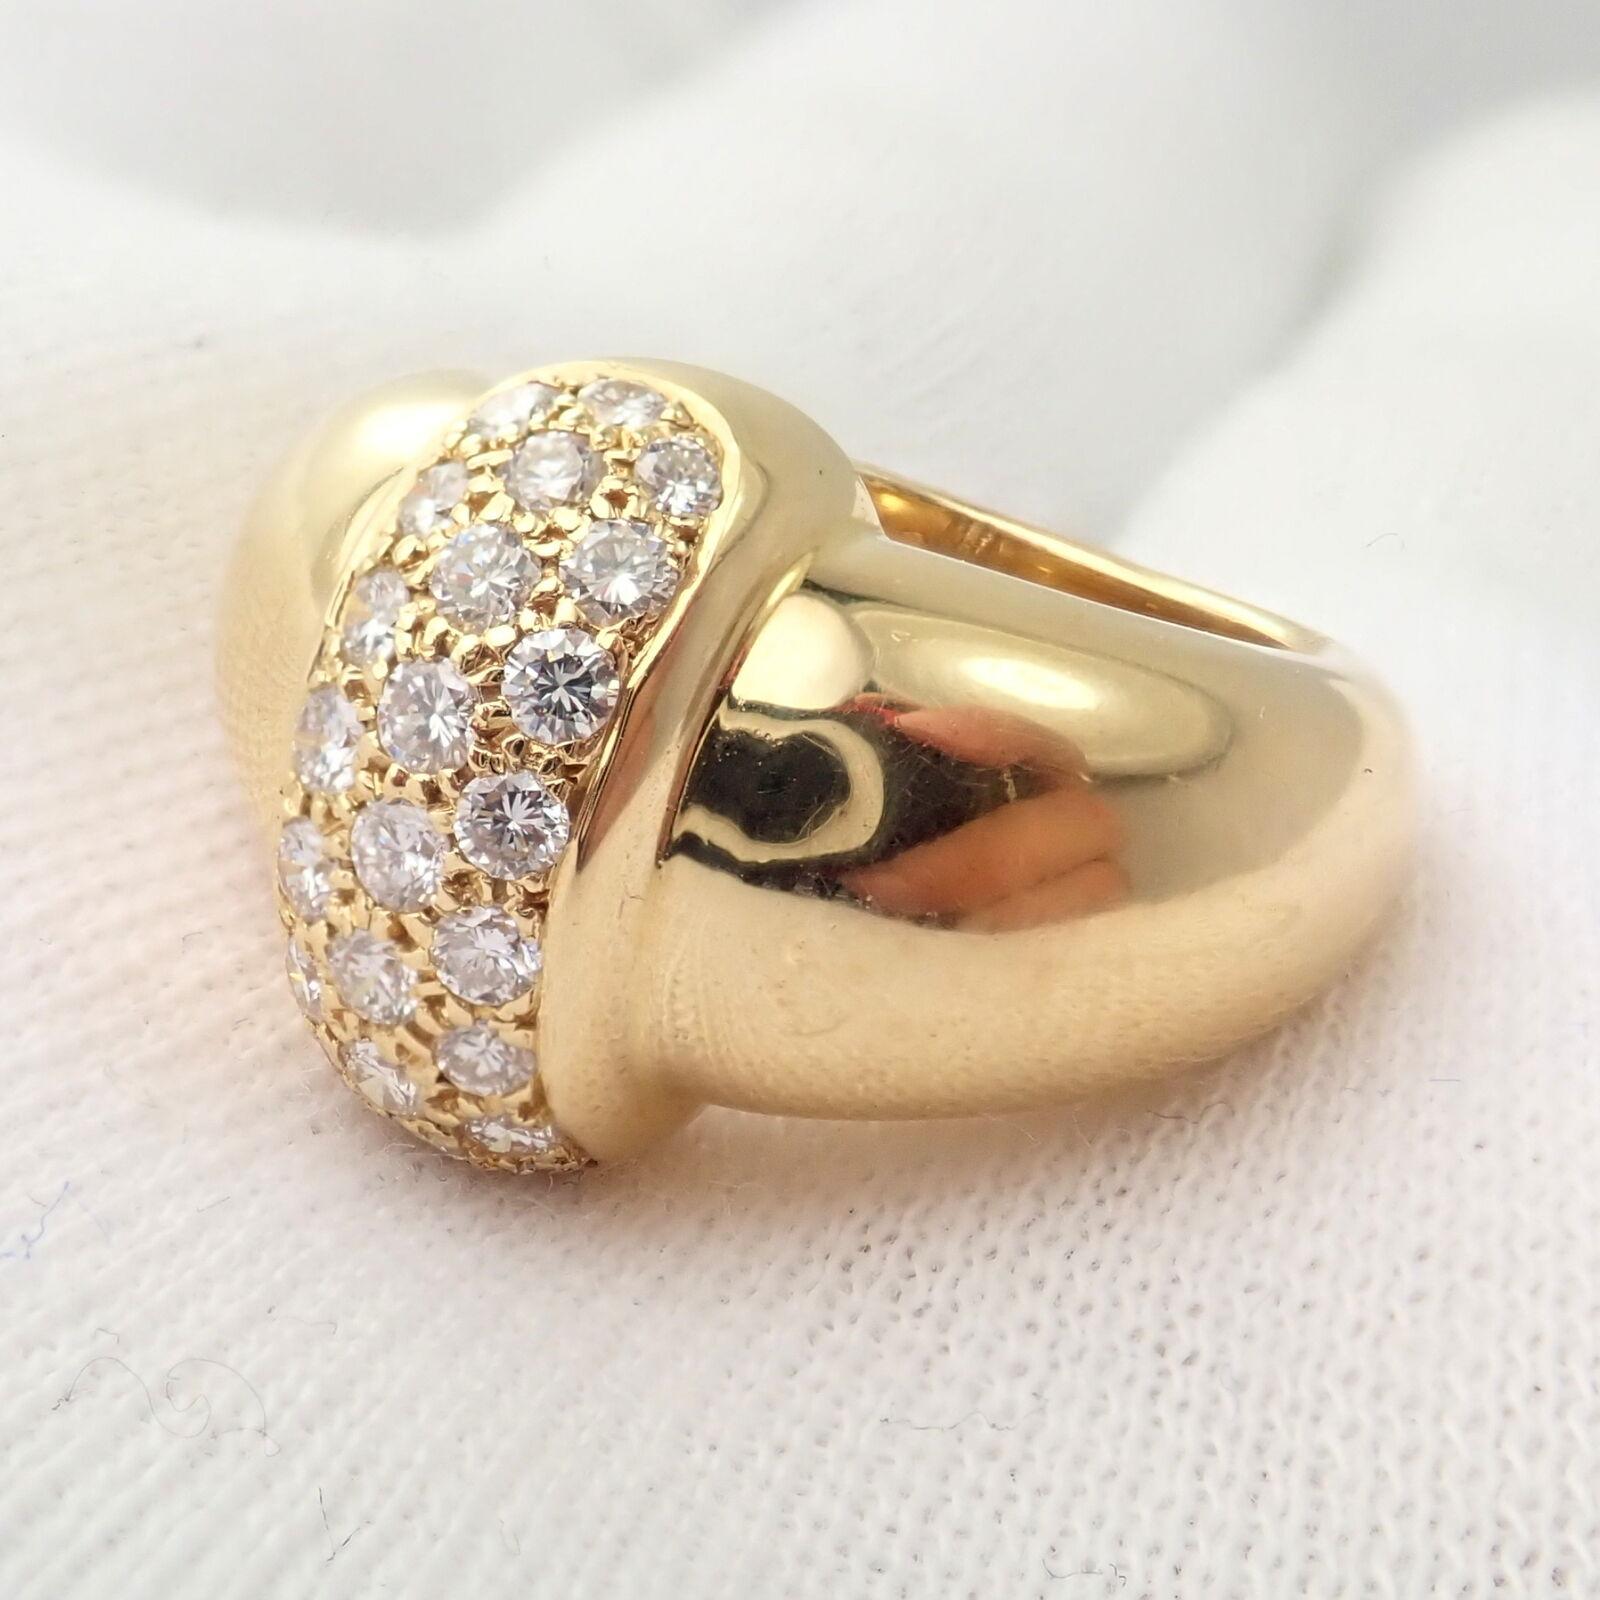 Van Cleef & Arpels Diamond Yellow Gold Cocktail Ring In Excellent Condition For Sale In Holland, PA